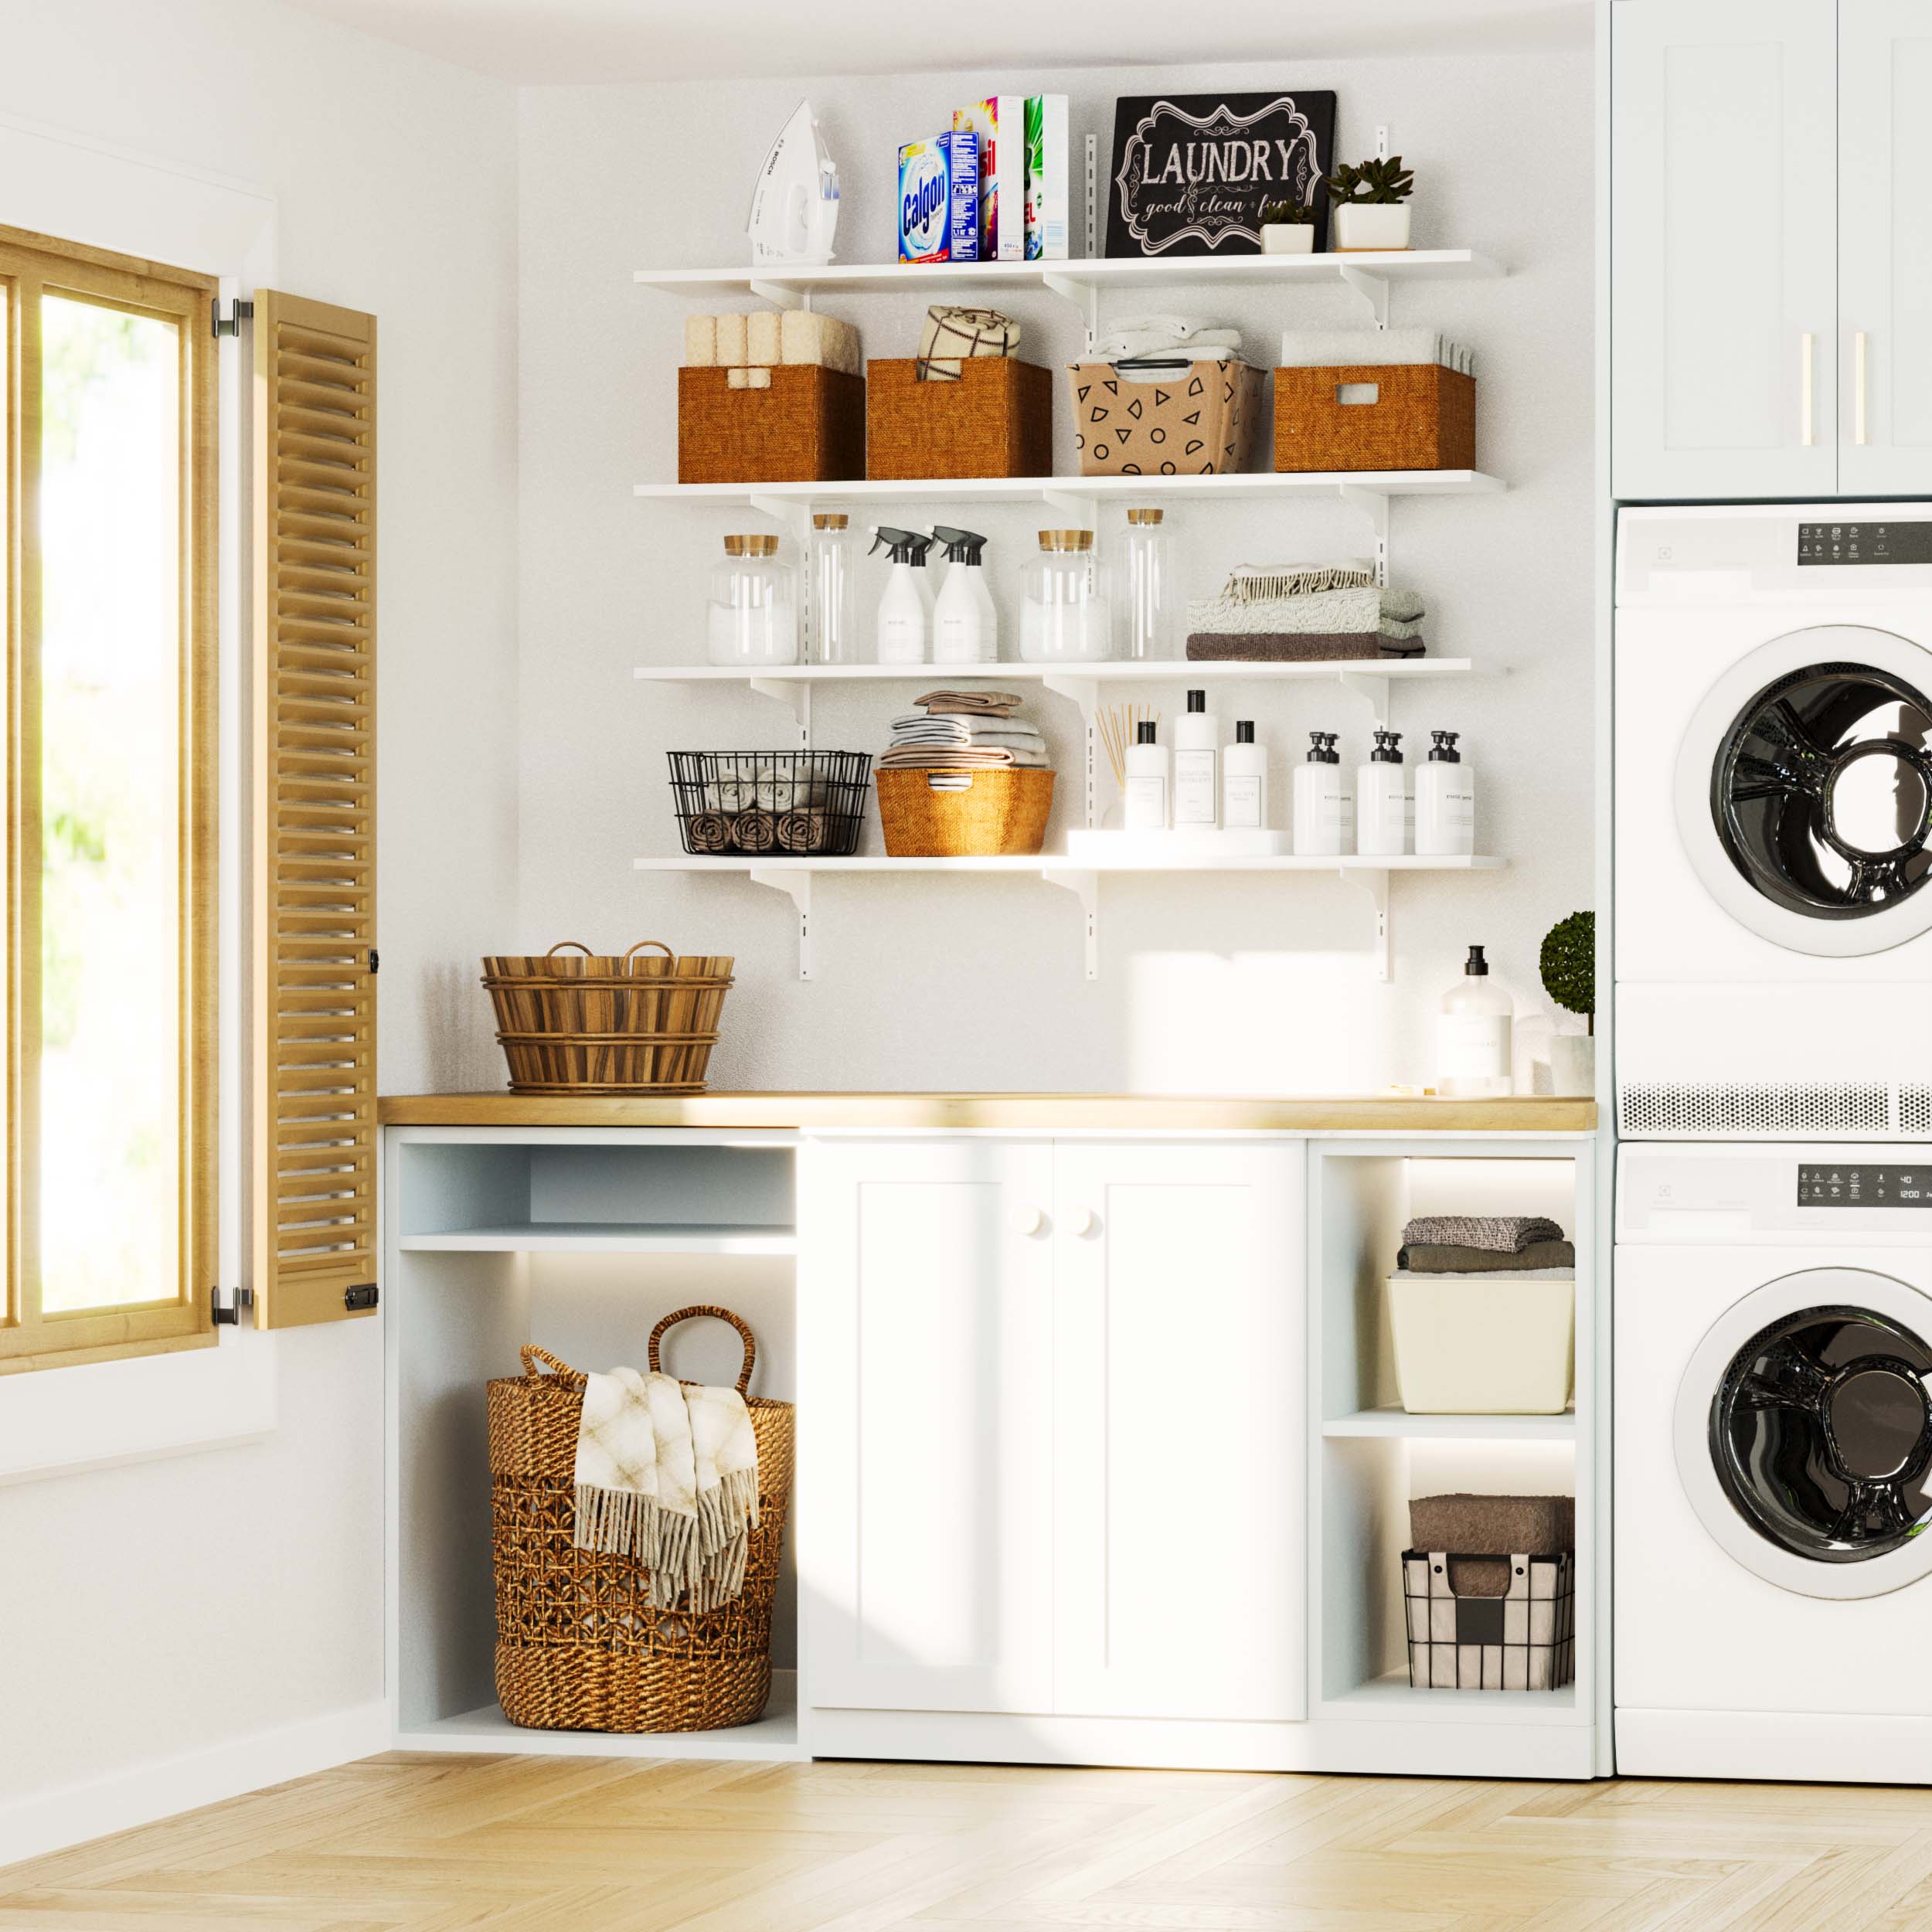 Laundry room with 48'' organizer shelves filled with towels, baskets, and washing essentials.